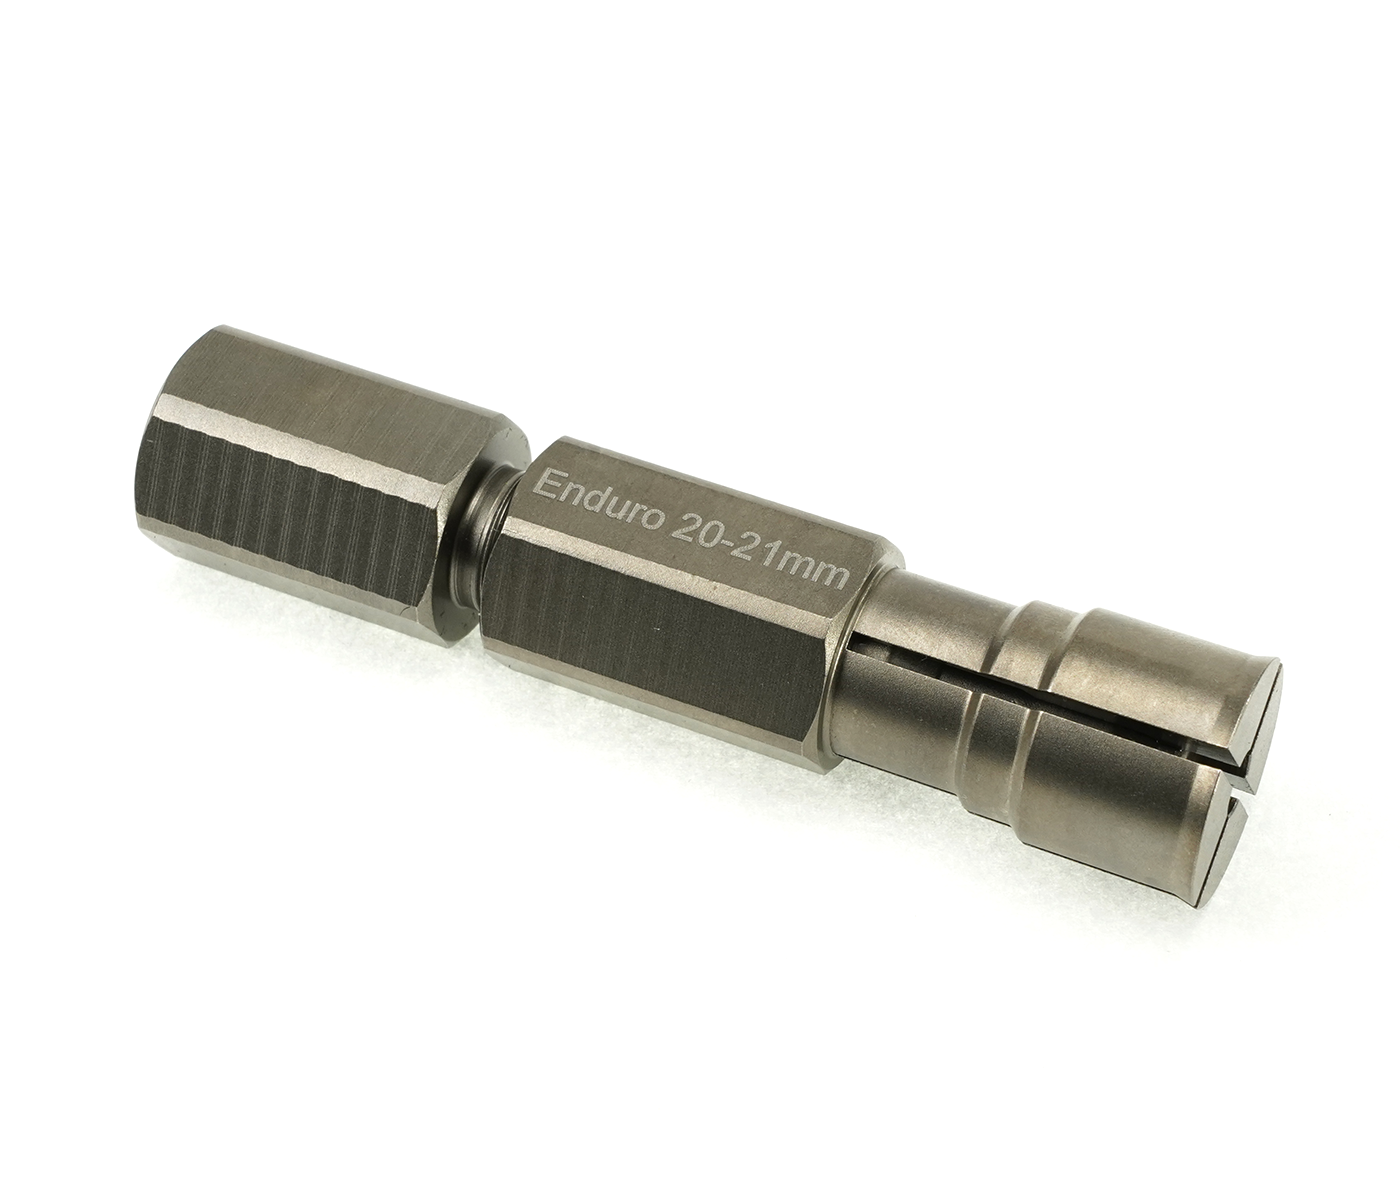 Enduro Puller 20-21 SS - Stainless Steel, Bearing Puller for bearings with 20-21mm IDs